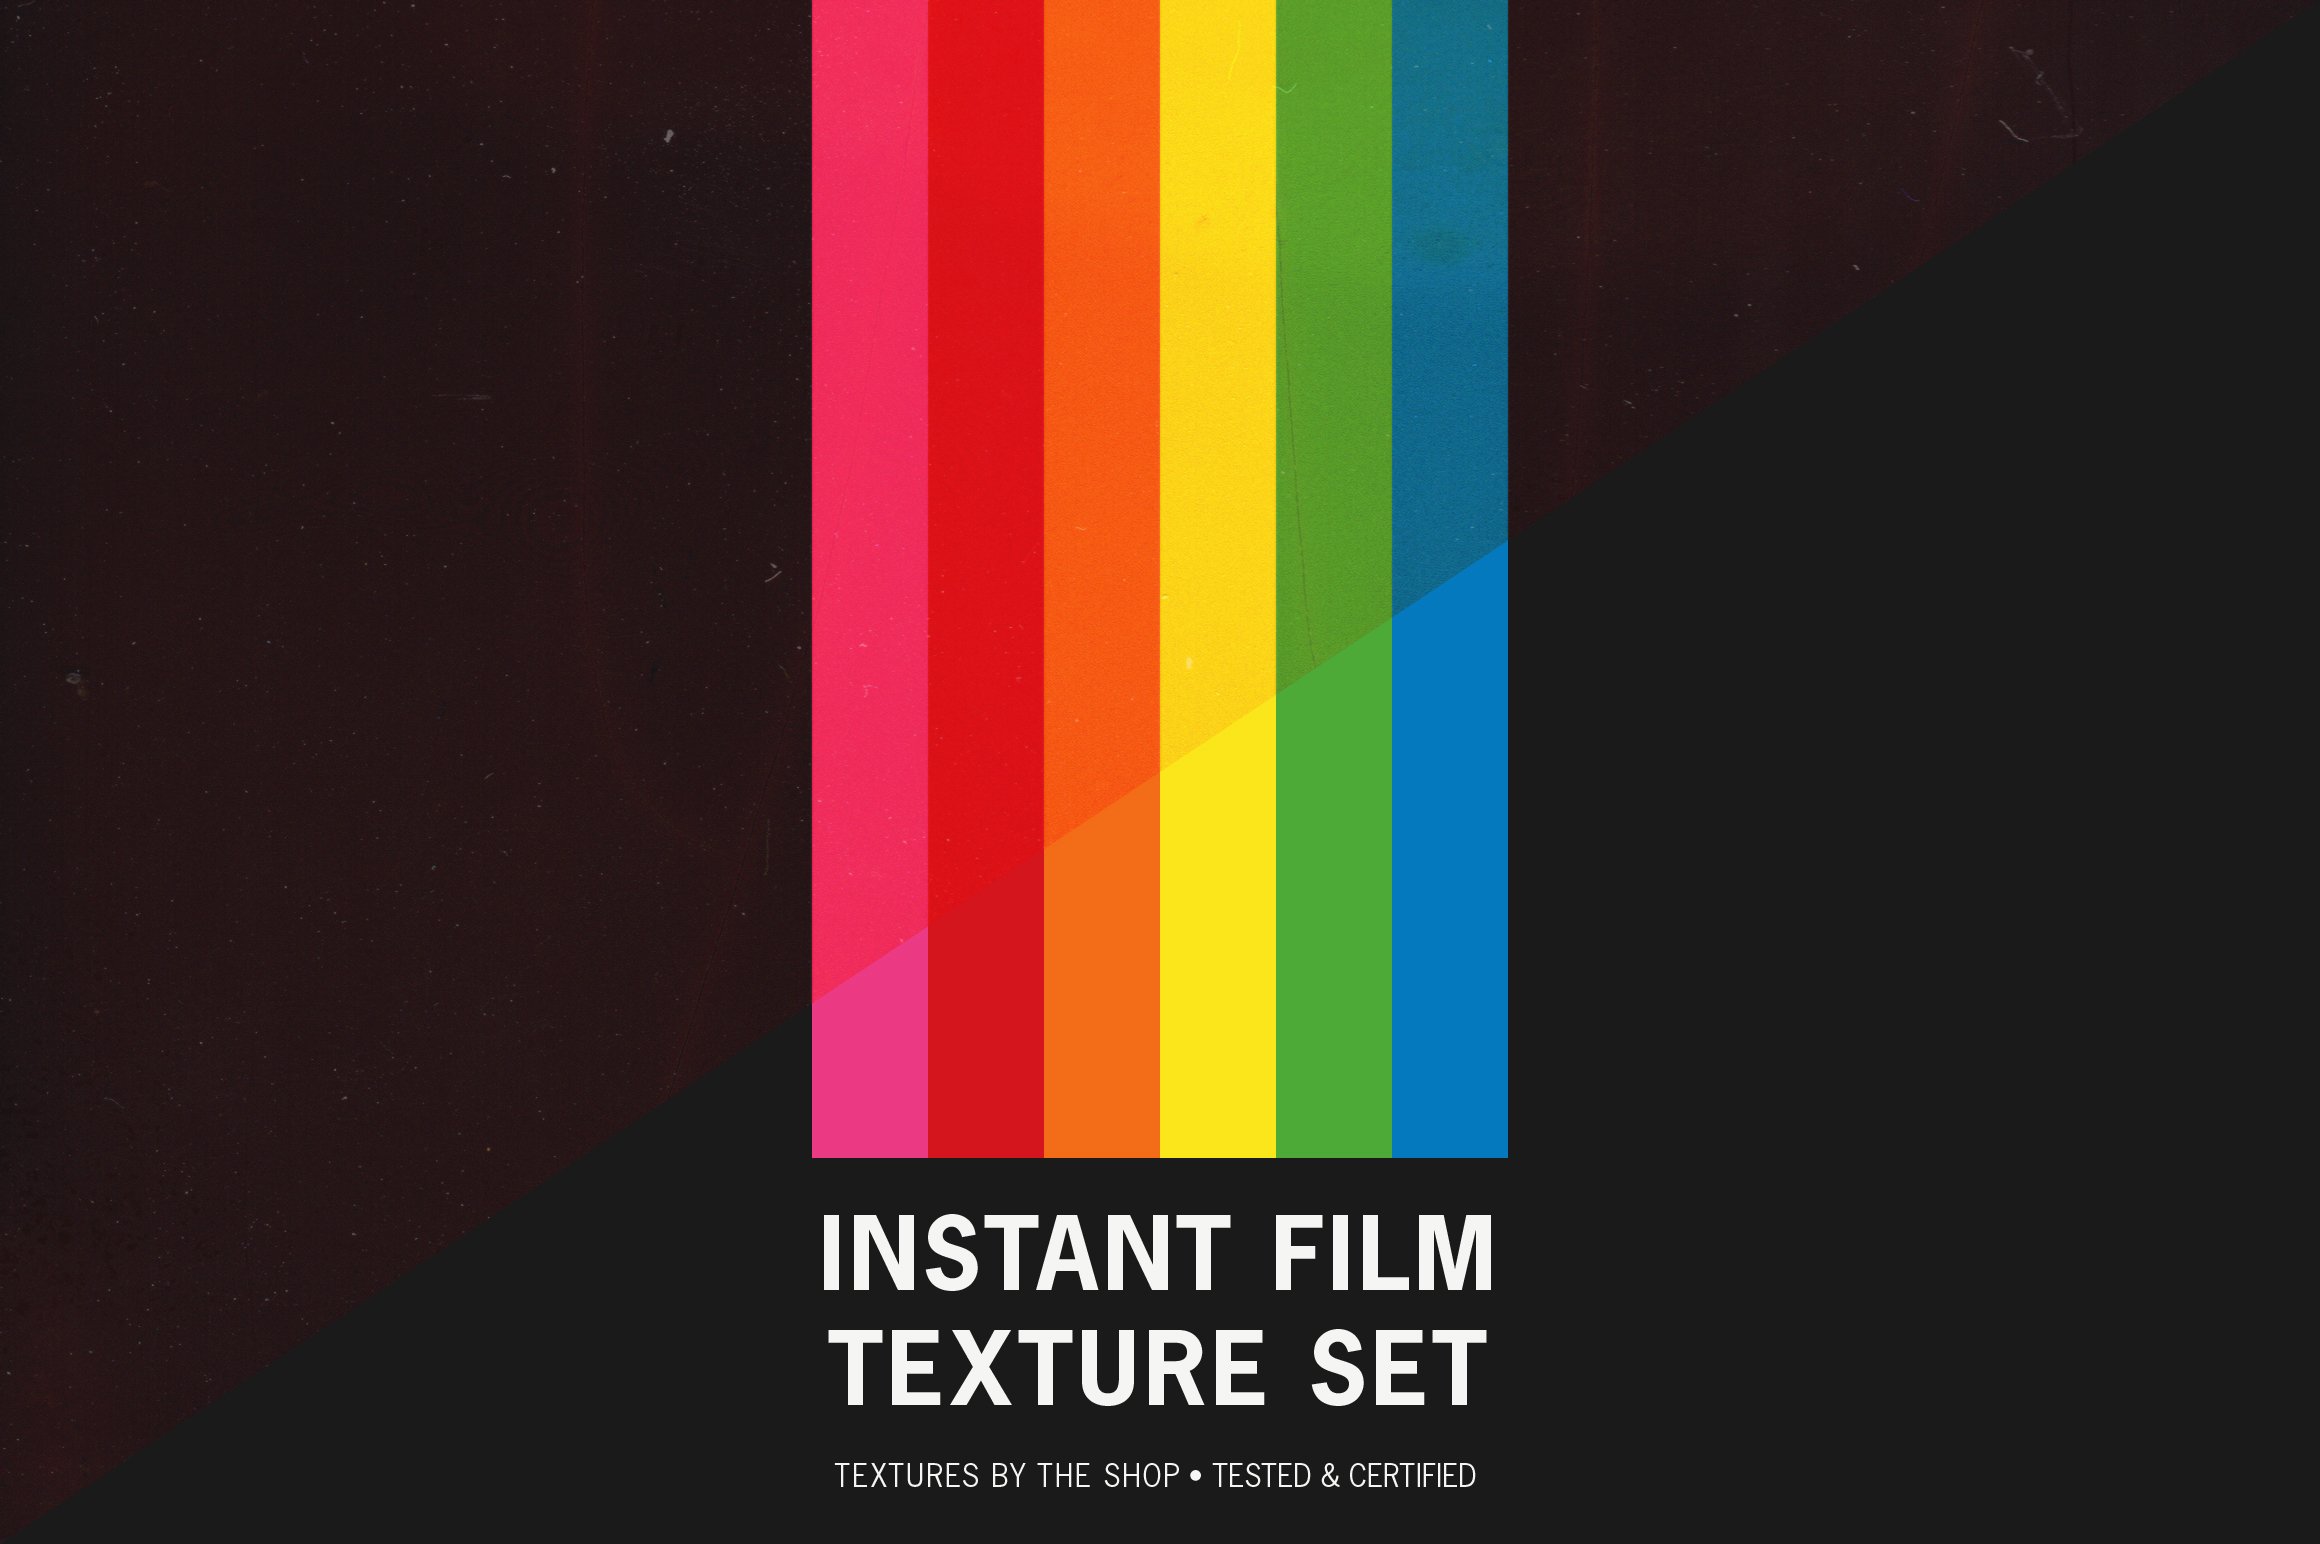 Expired Instant Film Texture Pack